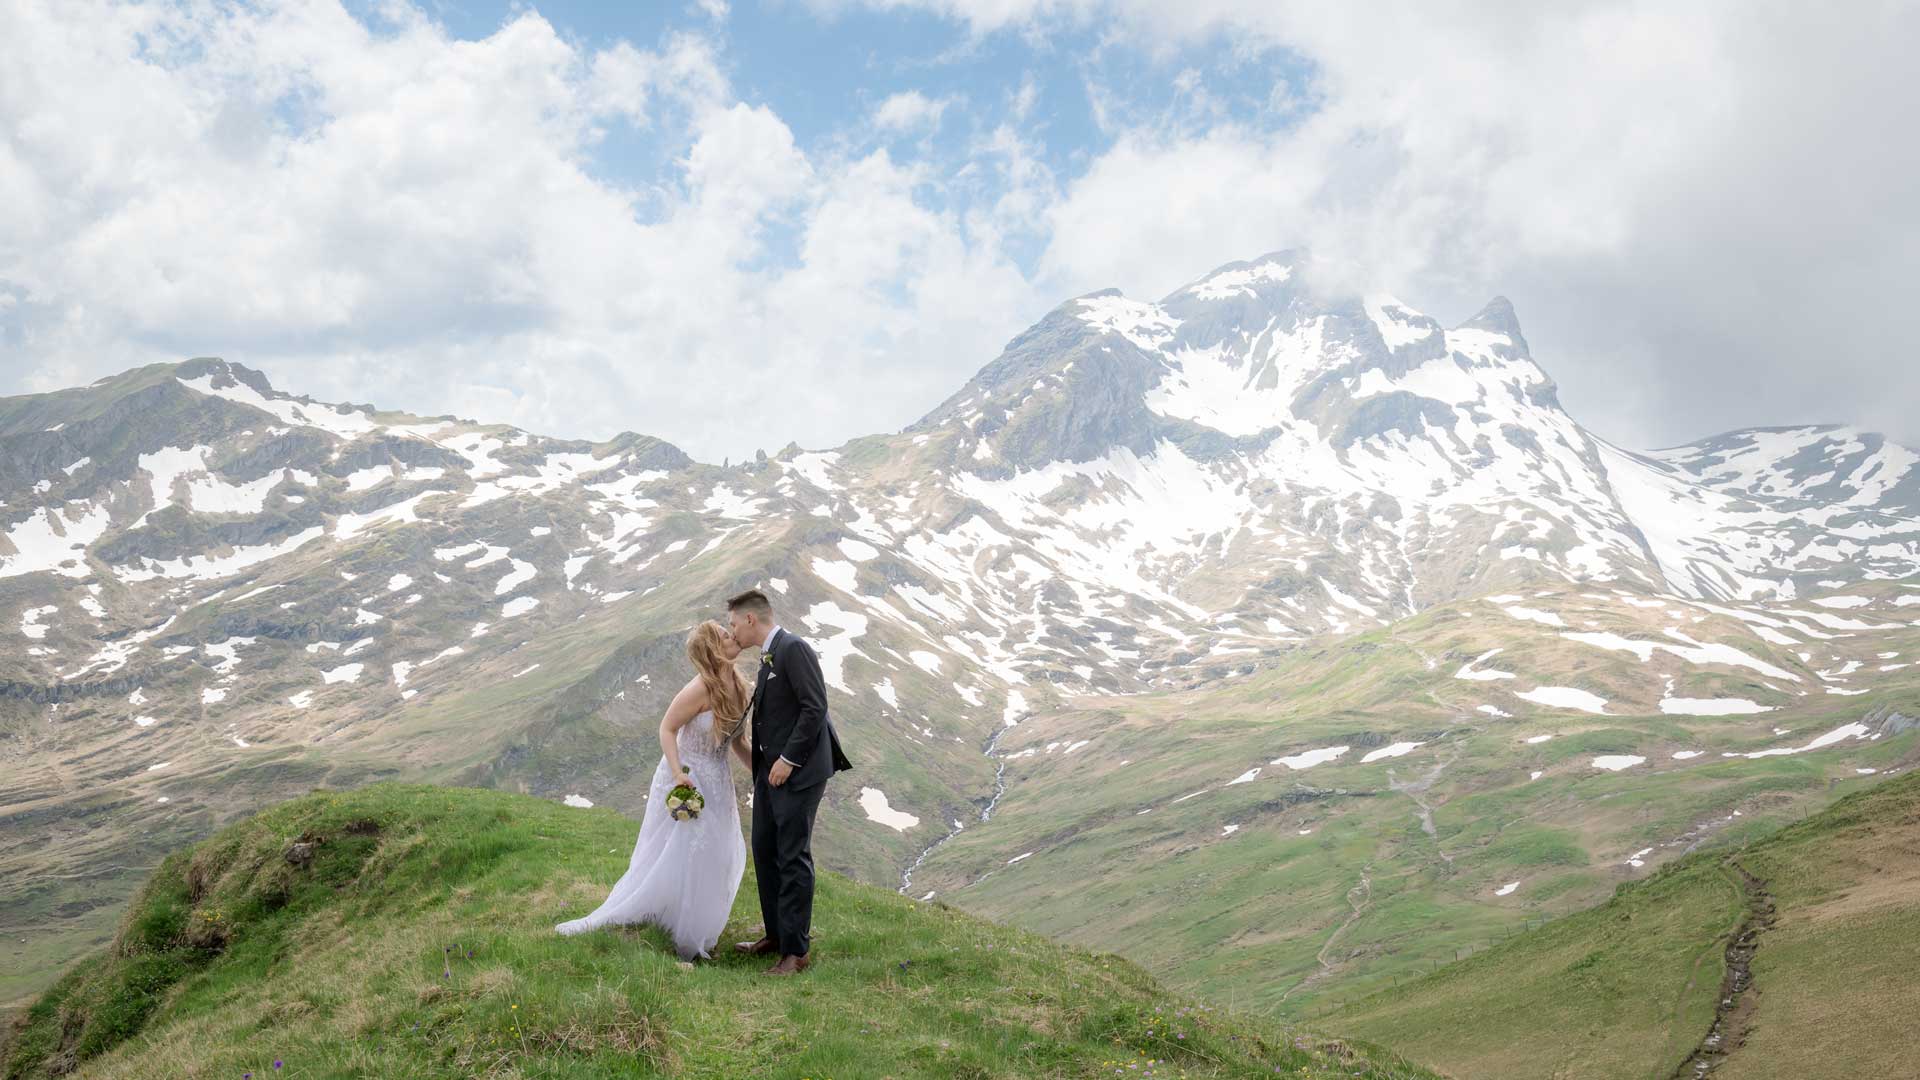 After Wedding Photo Shoot on Grindelwald First